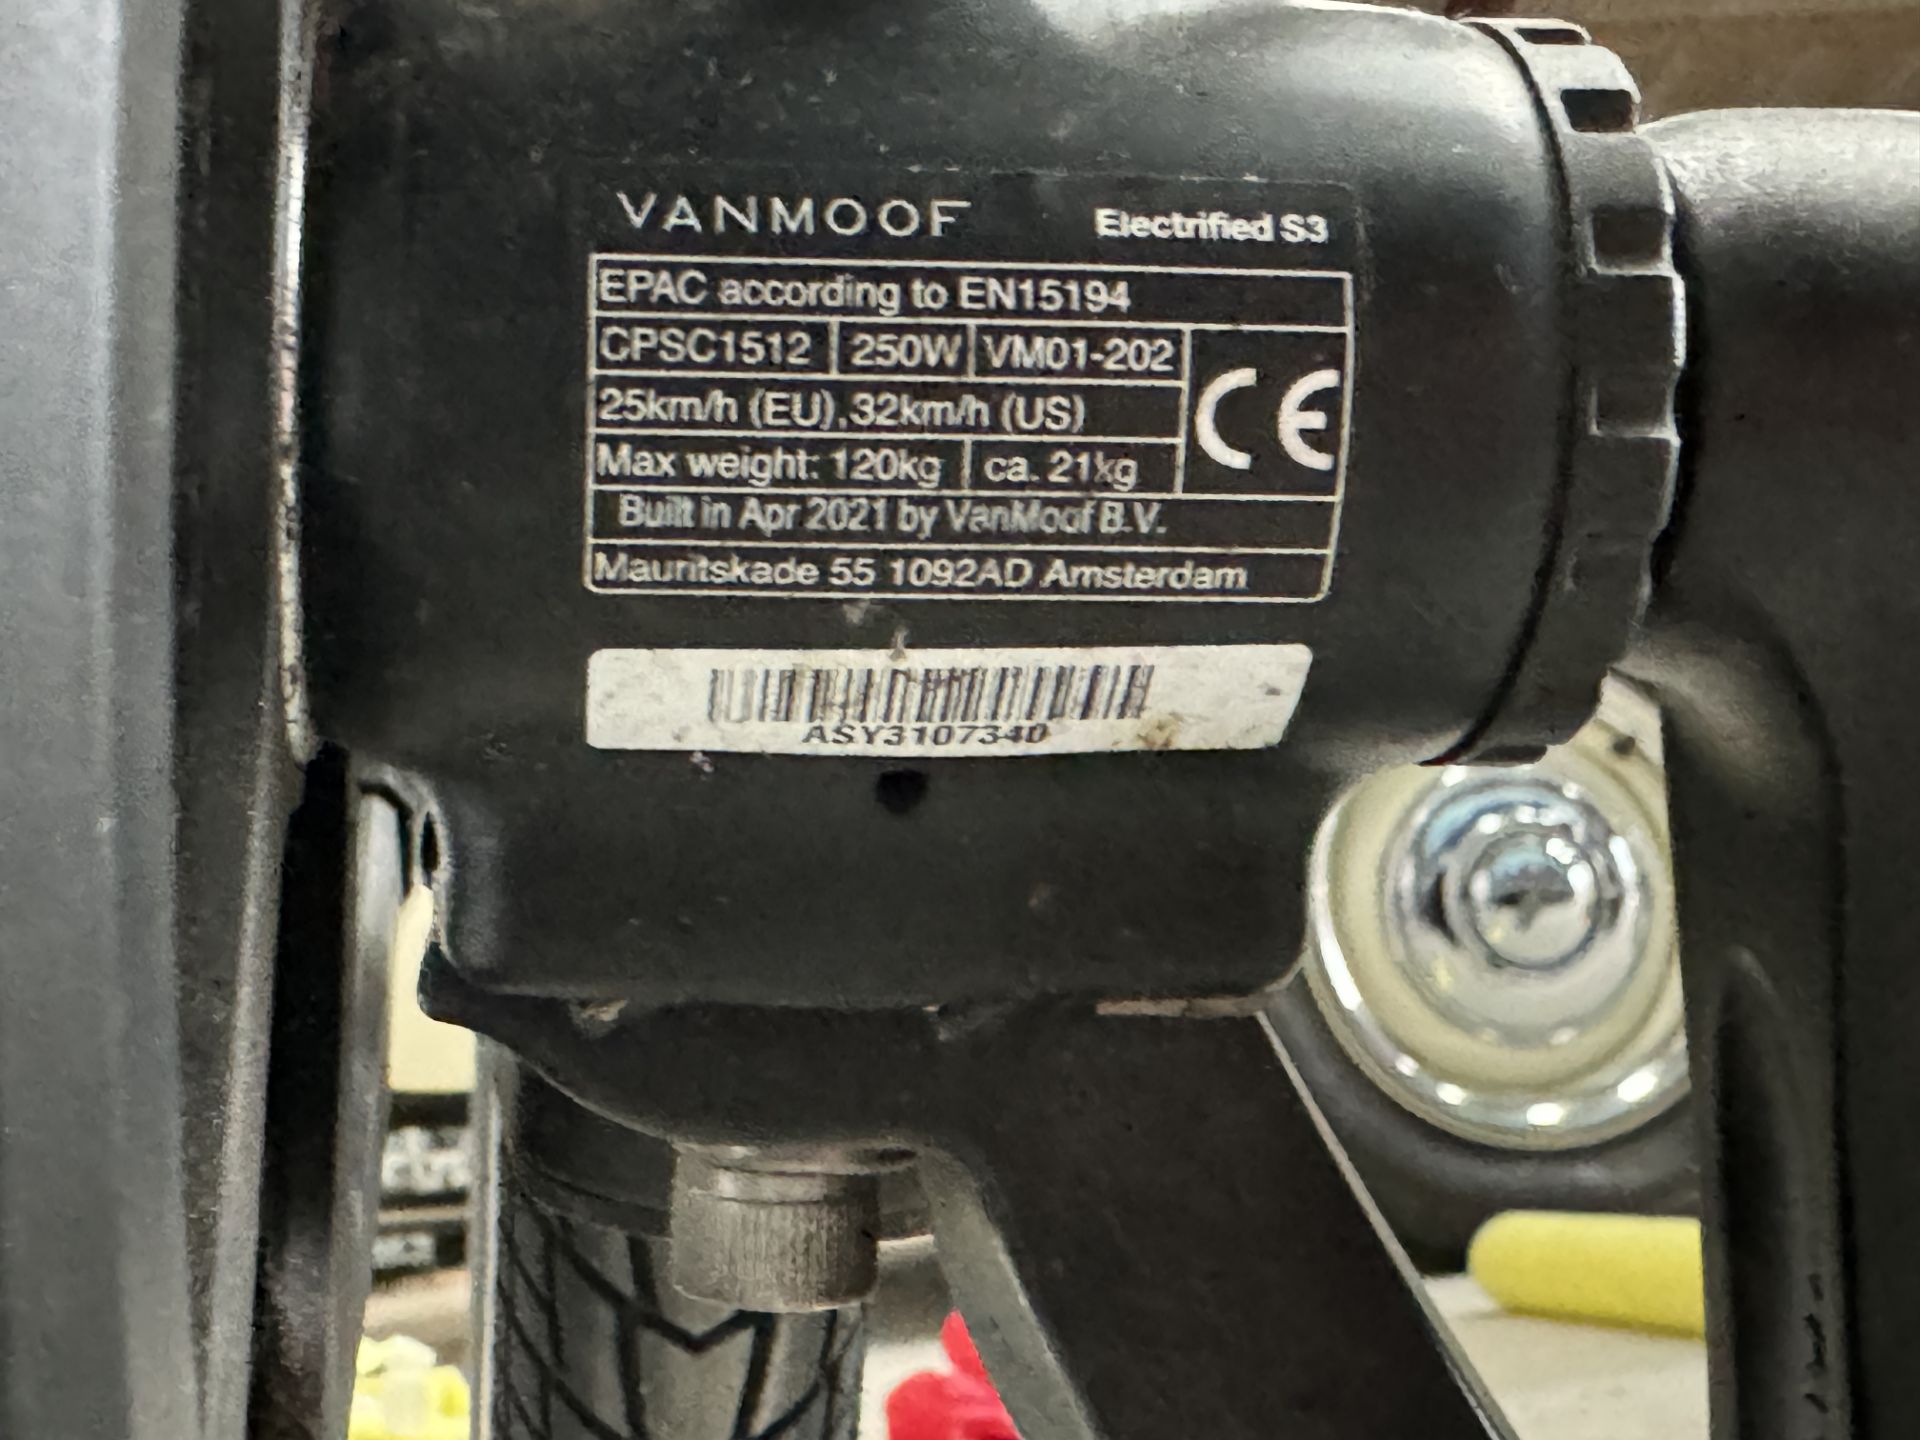 VanMoof S3 Electric Bike, Frame Number ASY3107340 (NOT ROADWORTHY - FOR SPARES ONLY) (No codes - Image 2 of 2